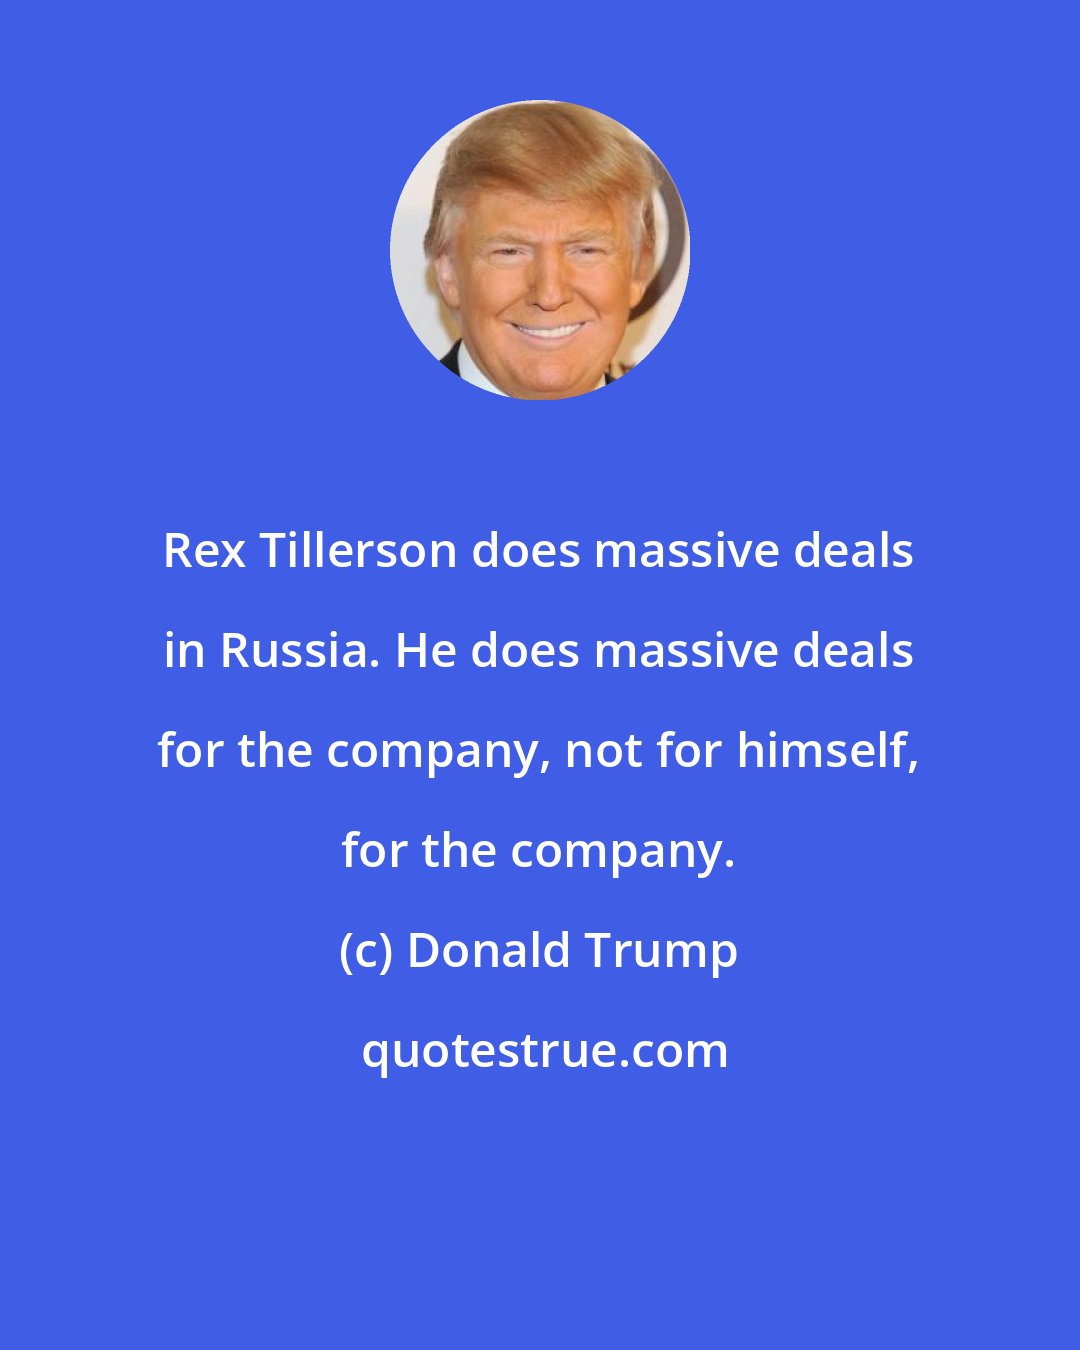 Donald Trump: Rex Tillerson does massive deals in Russia. He does massive deals for the company, not for himself, for the company.